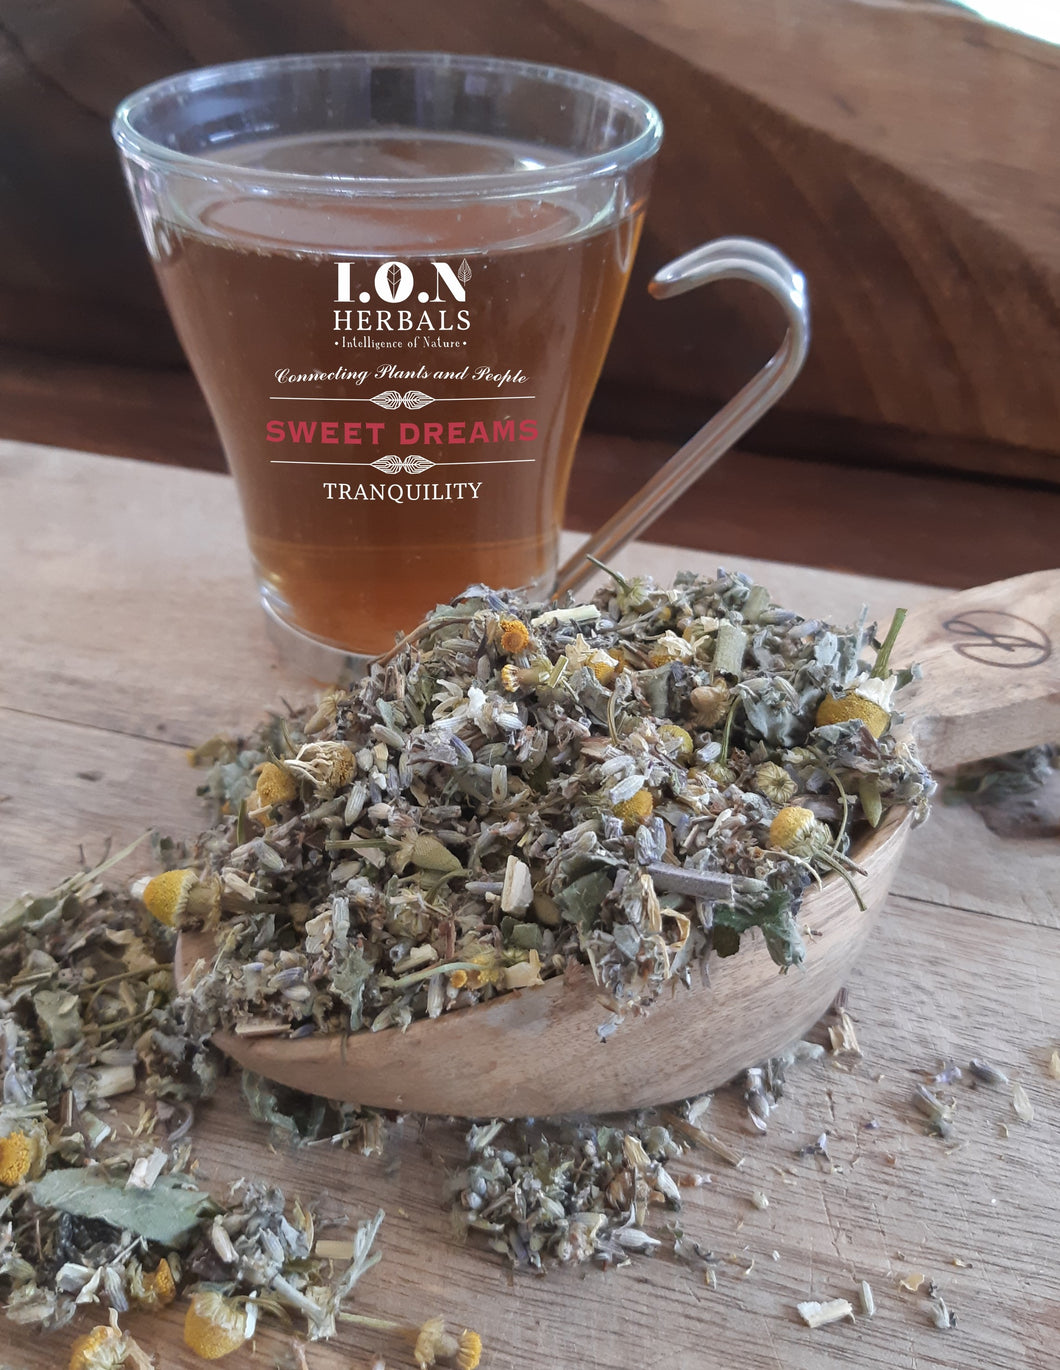 A herbal tea blend of soothing herbs that may reduce anxiety, promote relaxation and evoke more vivid dreams.